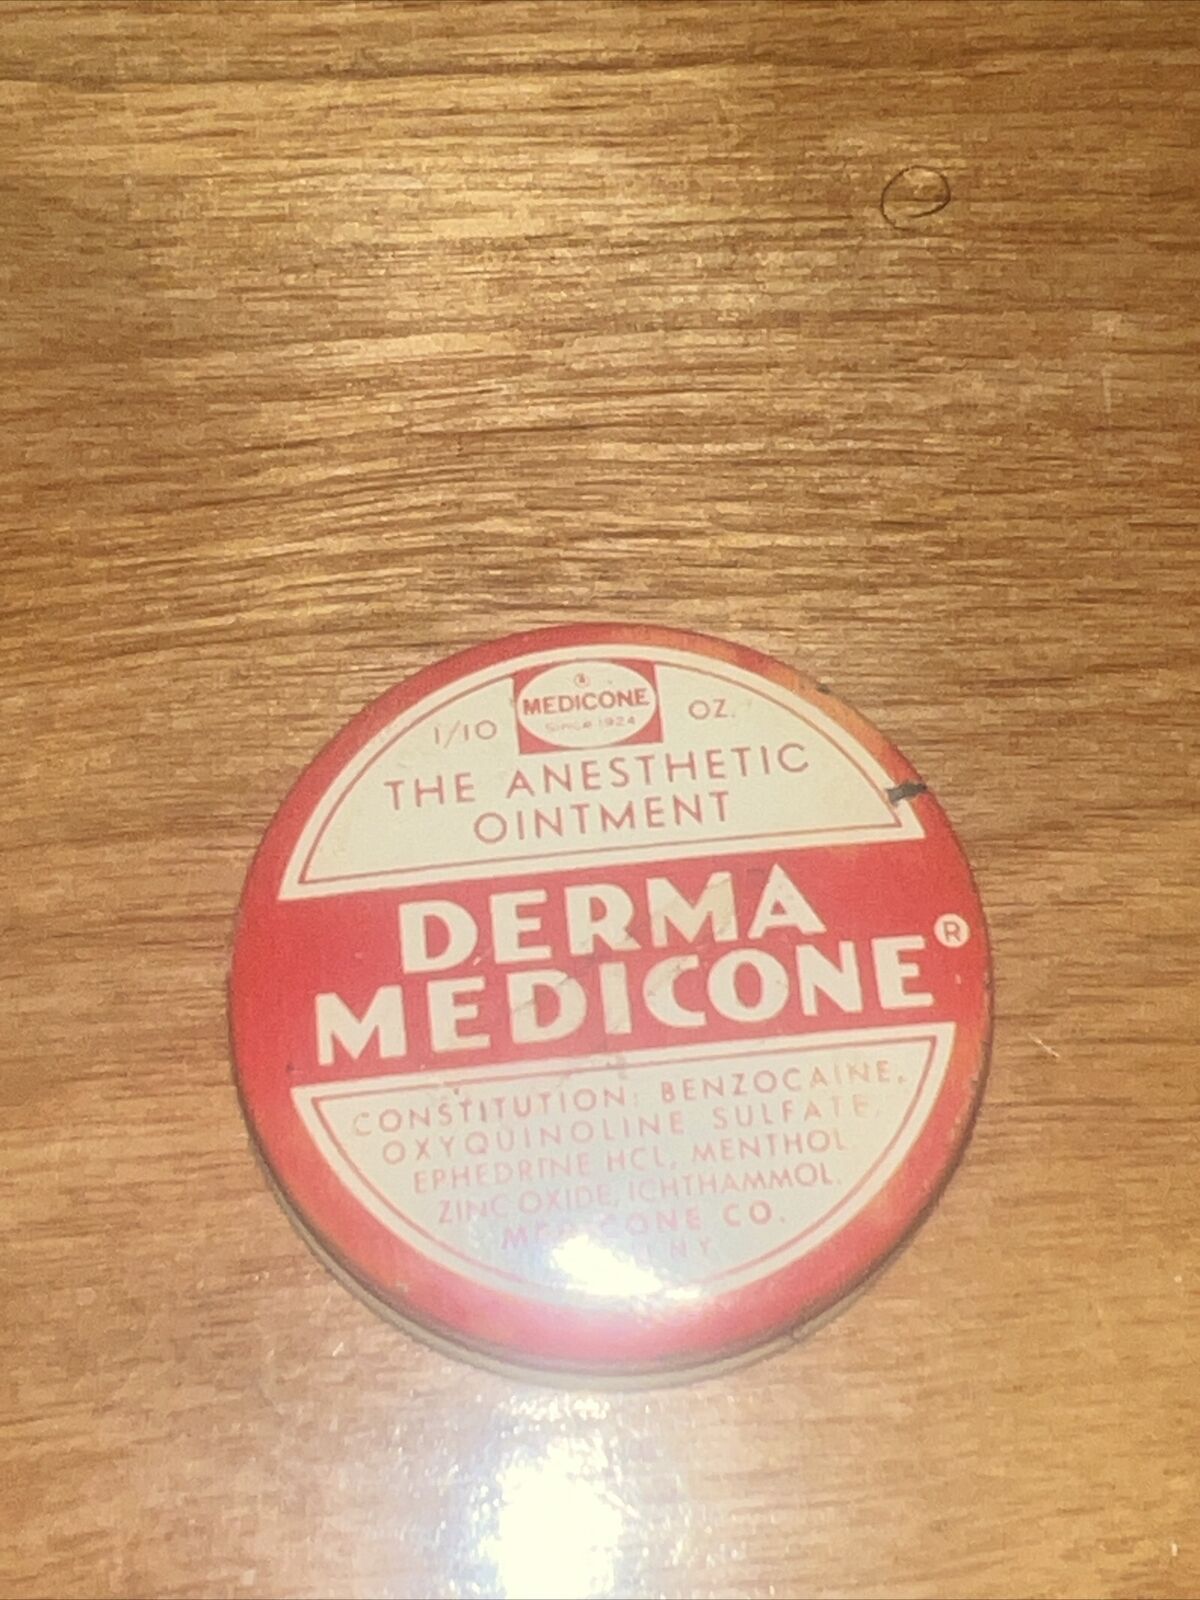 Vintage Derma Medicone Anesthetic Ointment Advertising Tin Can 